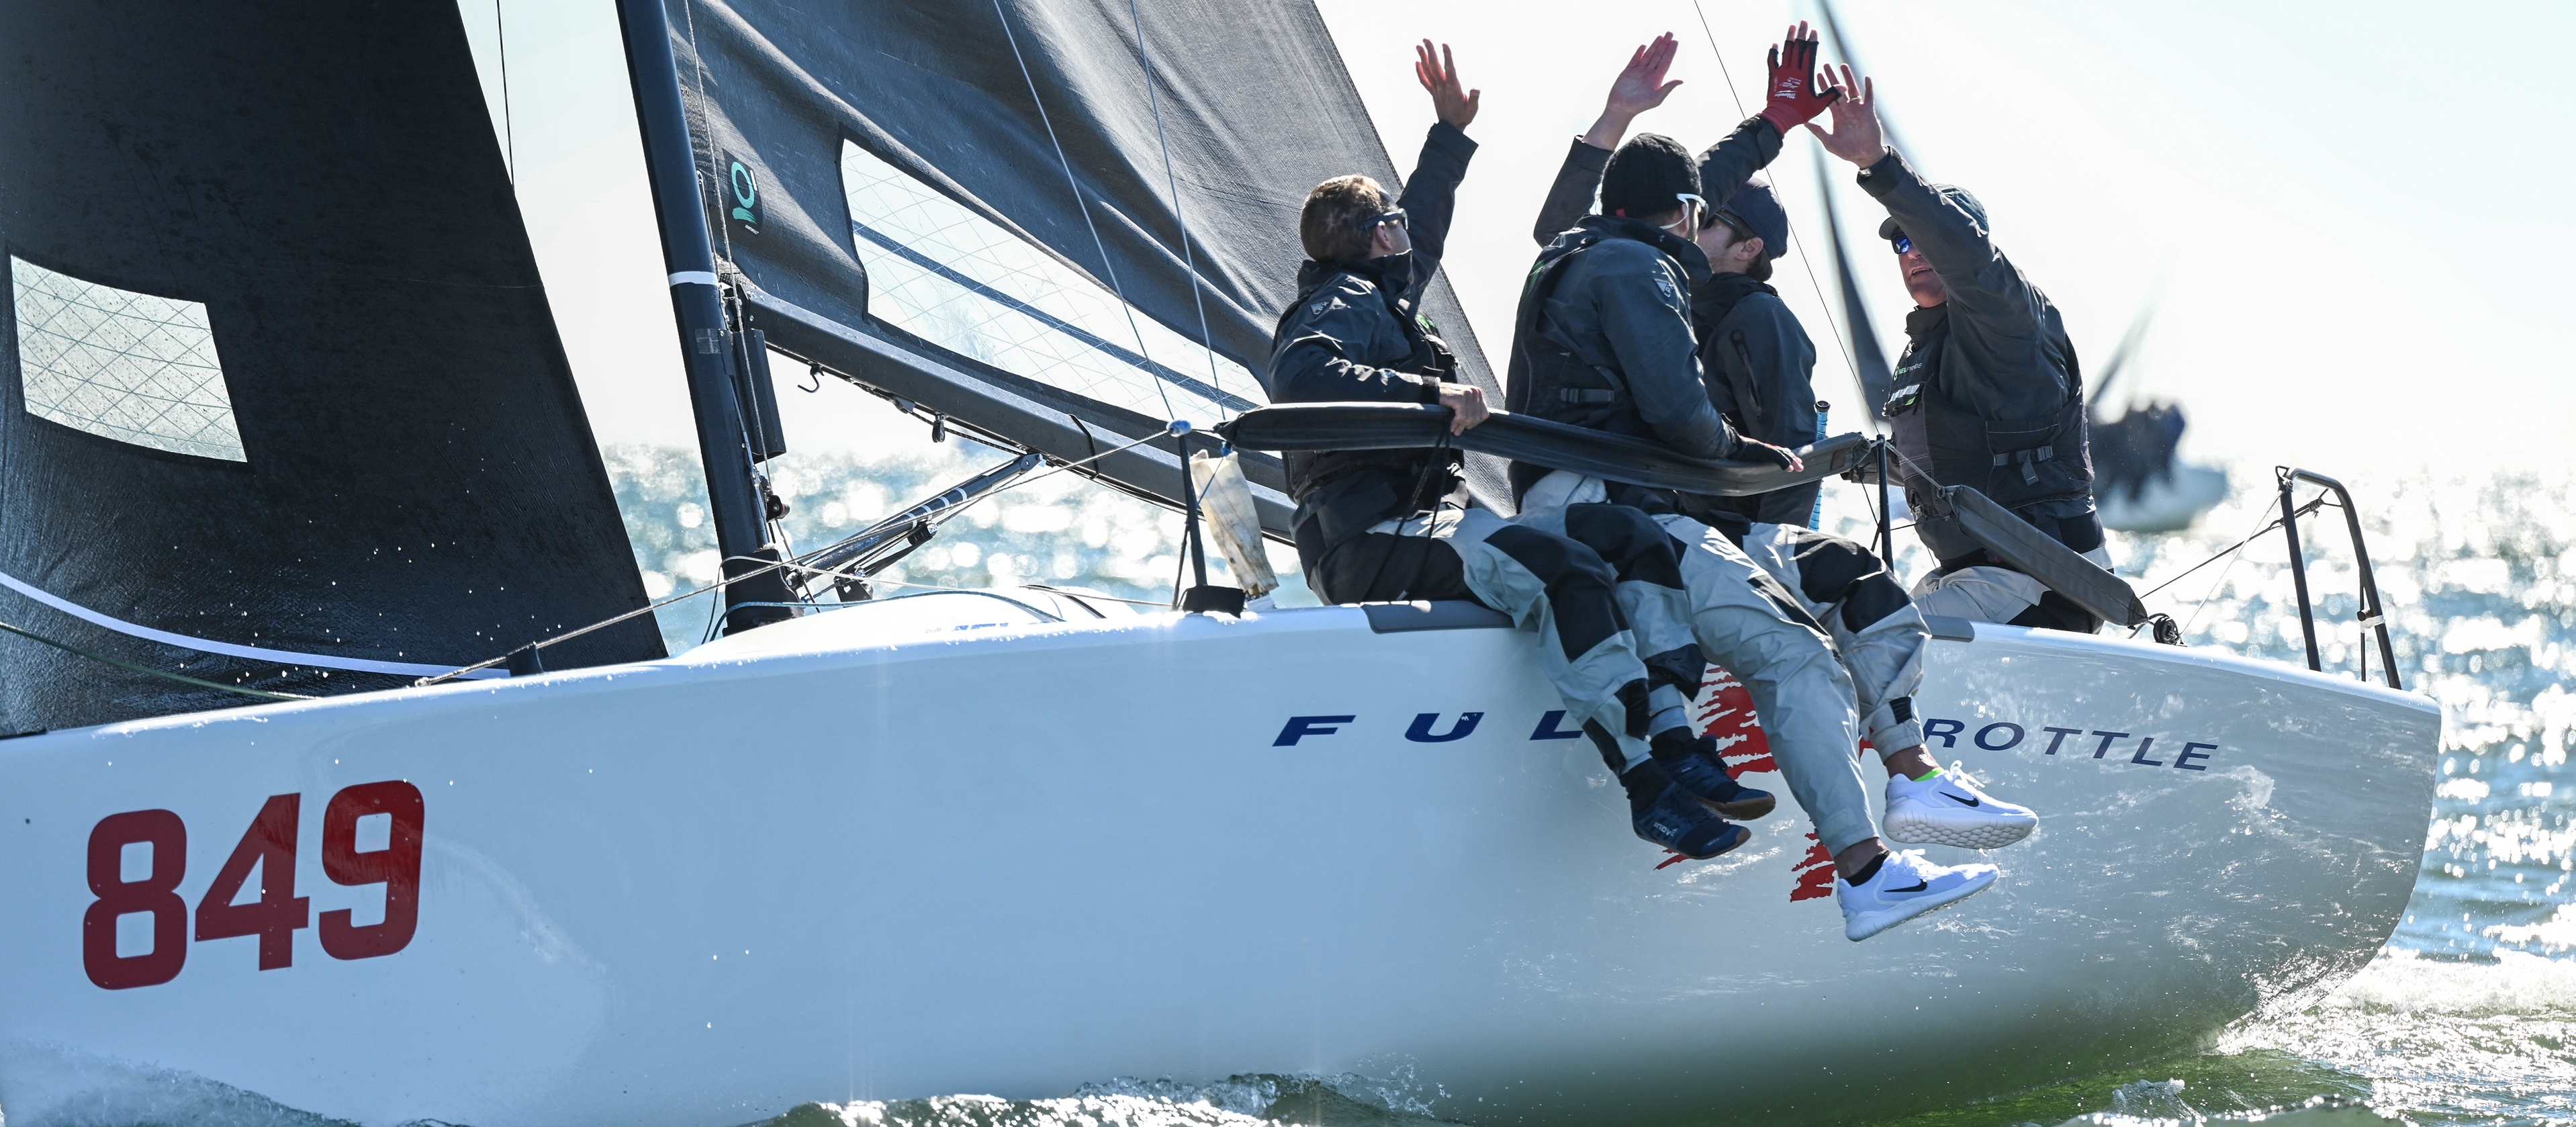 Porter Claims 9th Melges 24 U.S. Nationals Title